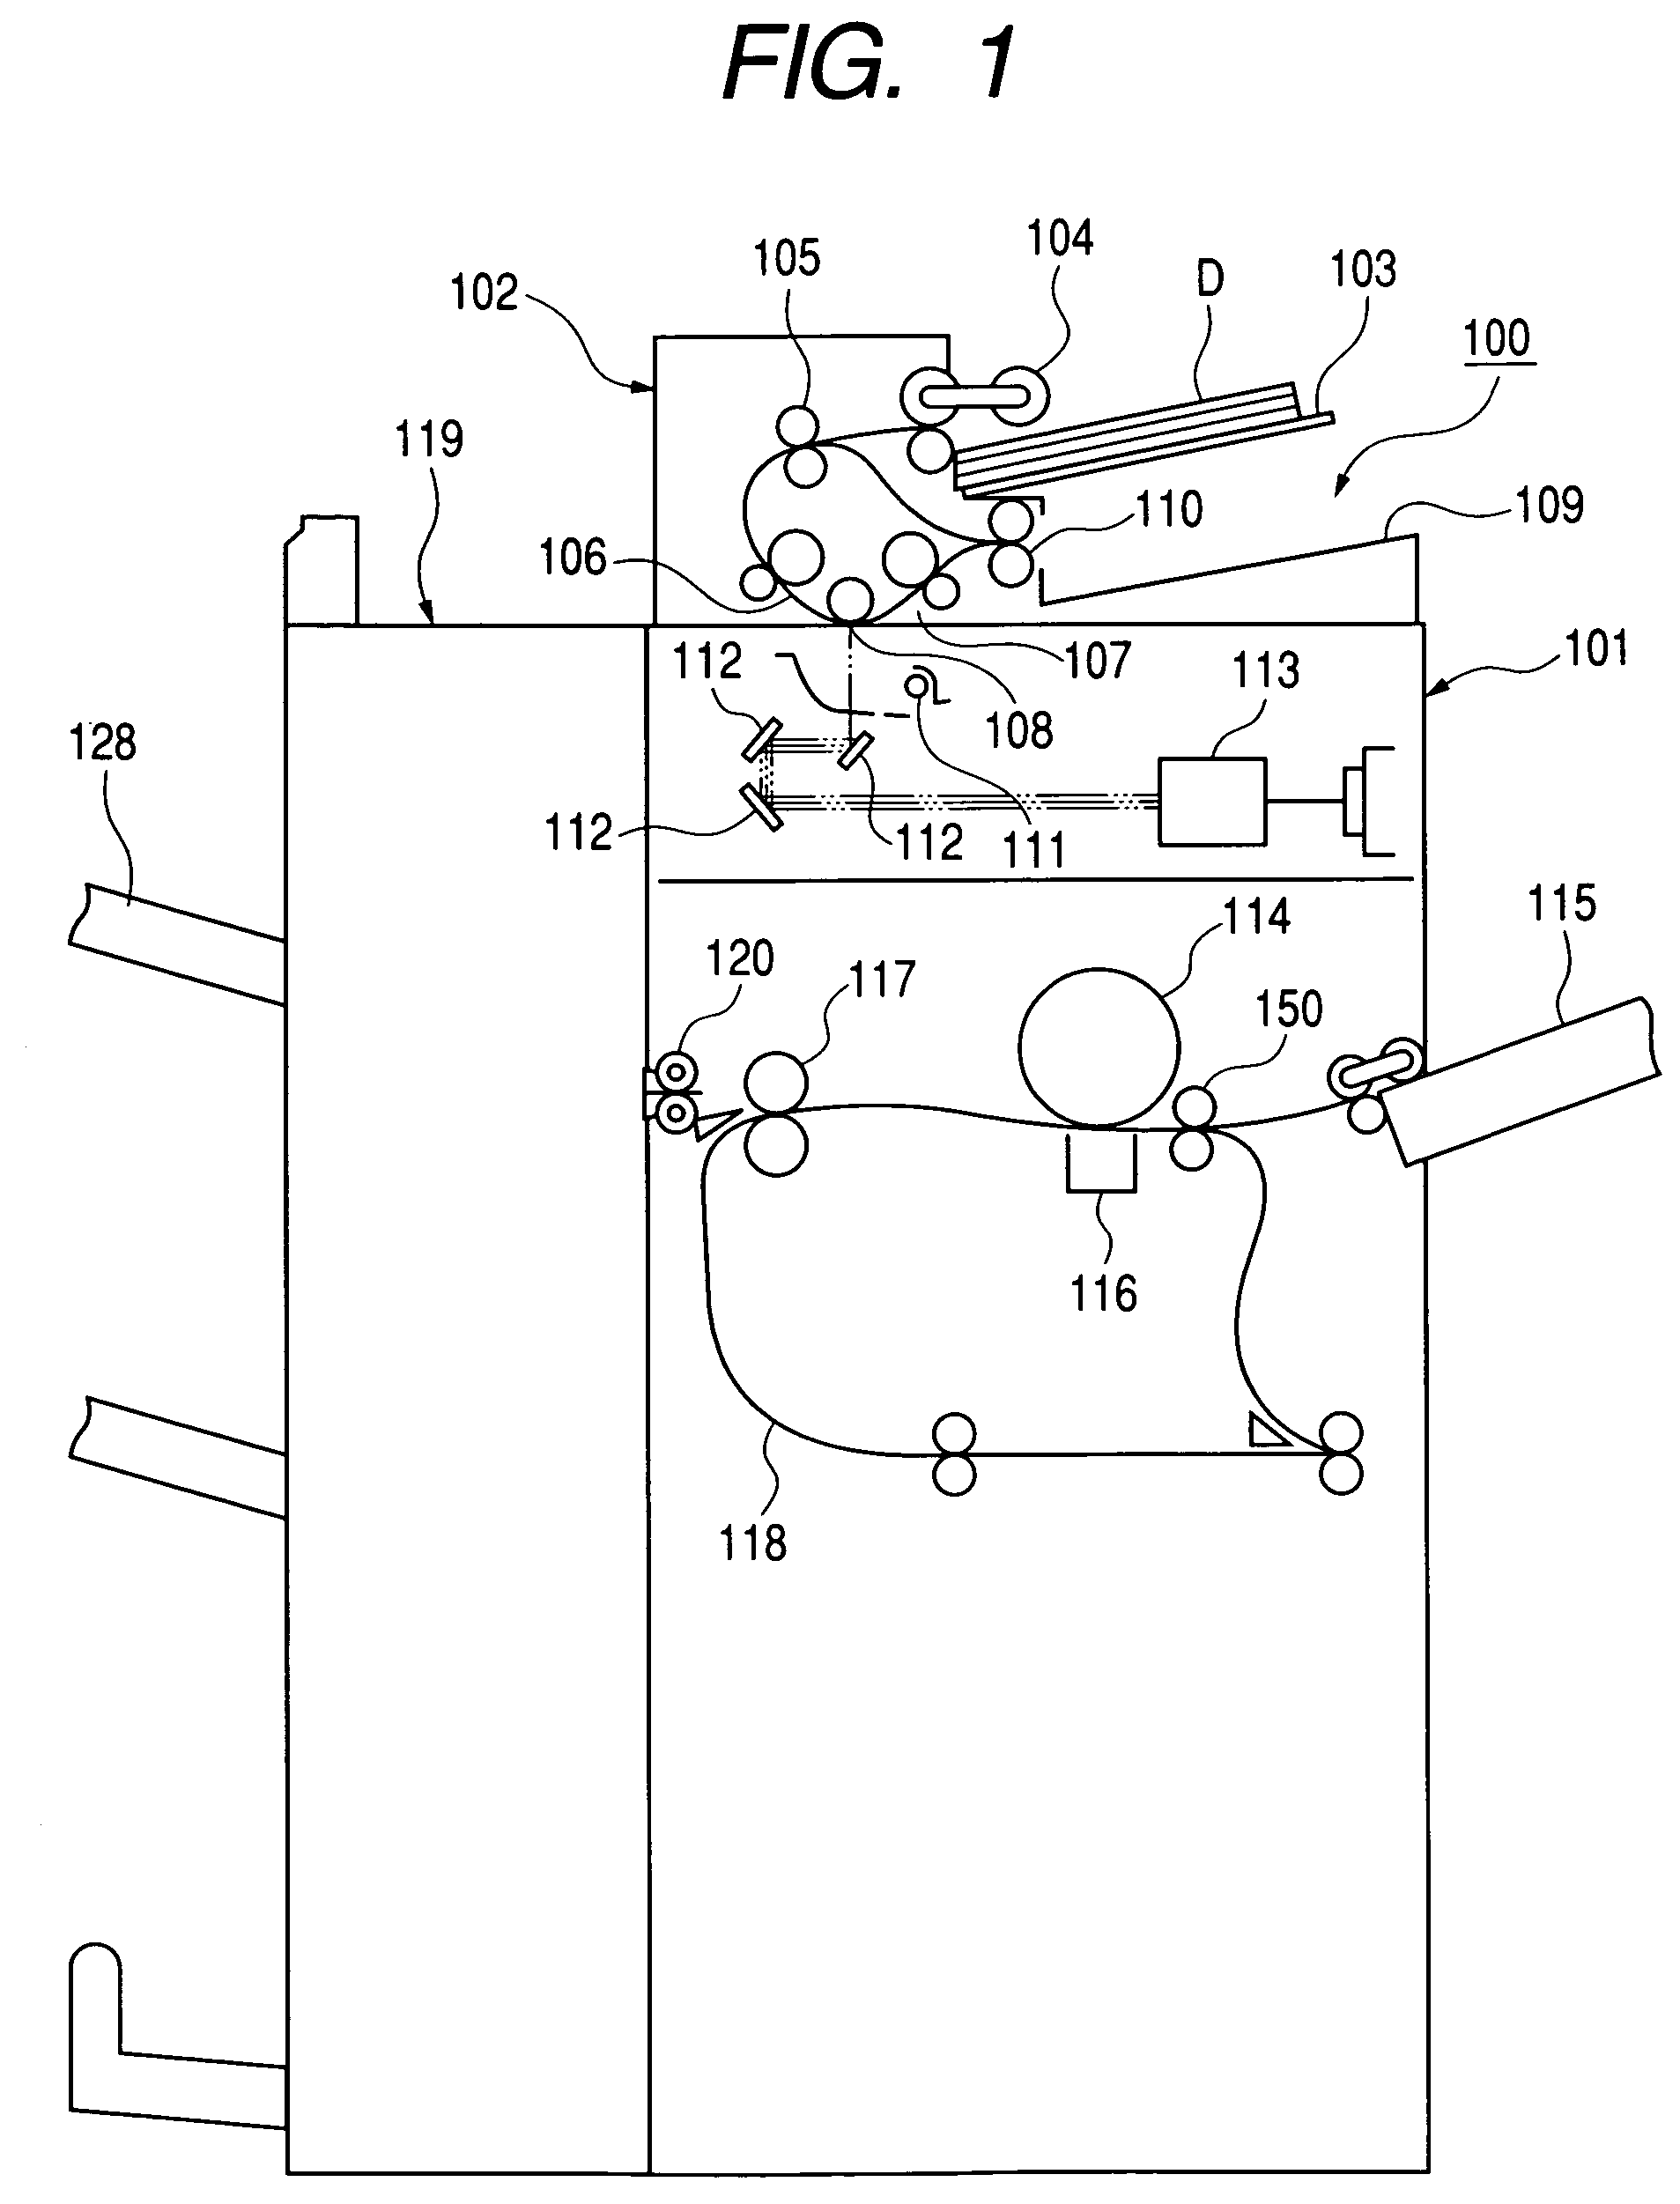 Sheet processing apparatus for storing supplied sheets while preceding sheet are processed